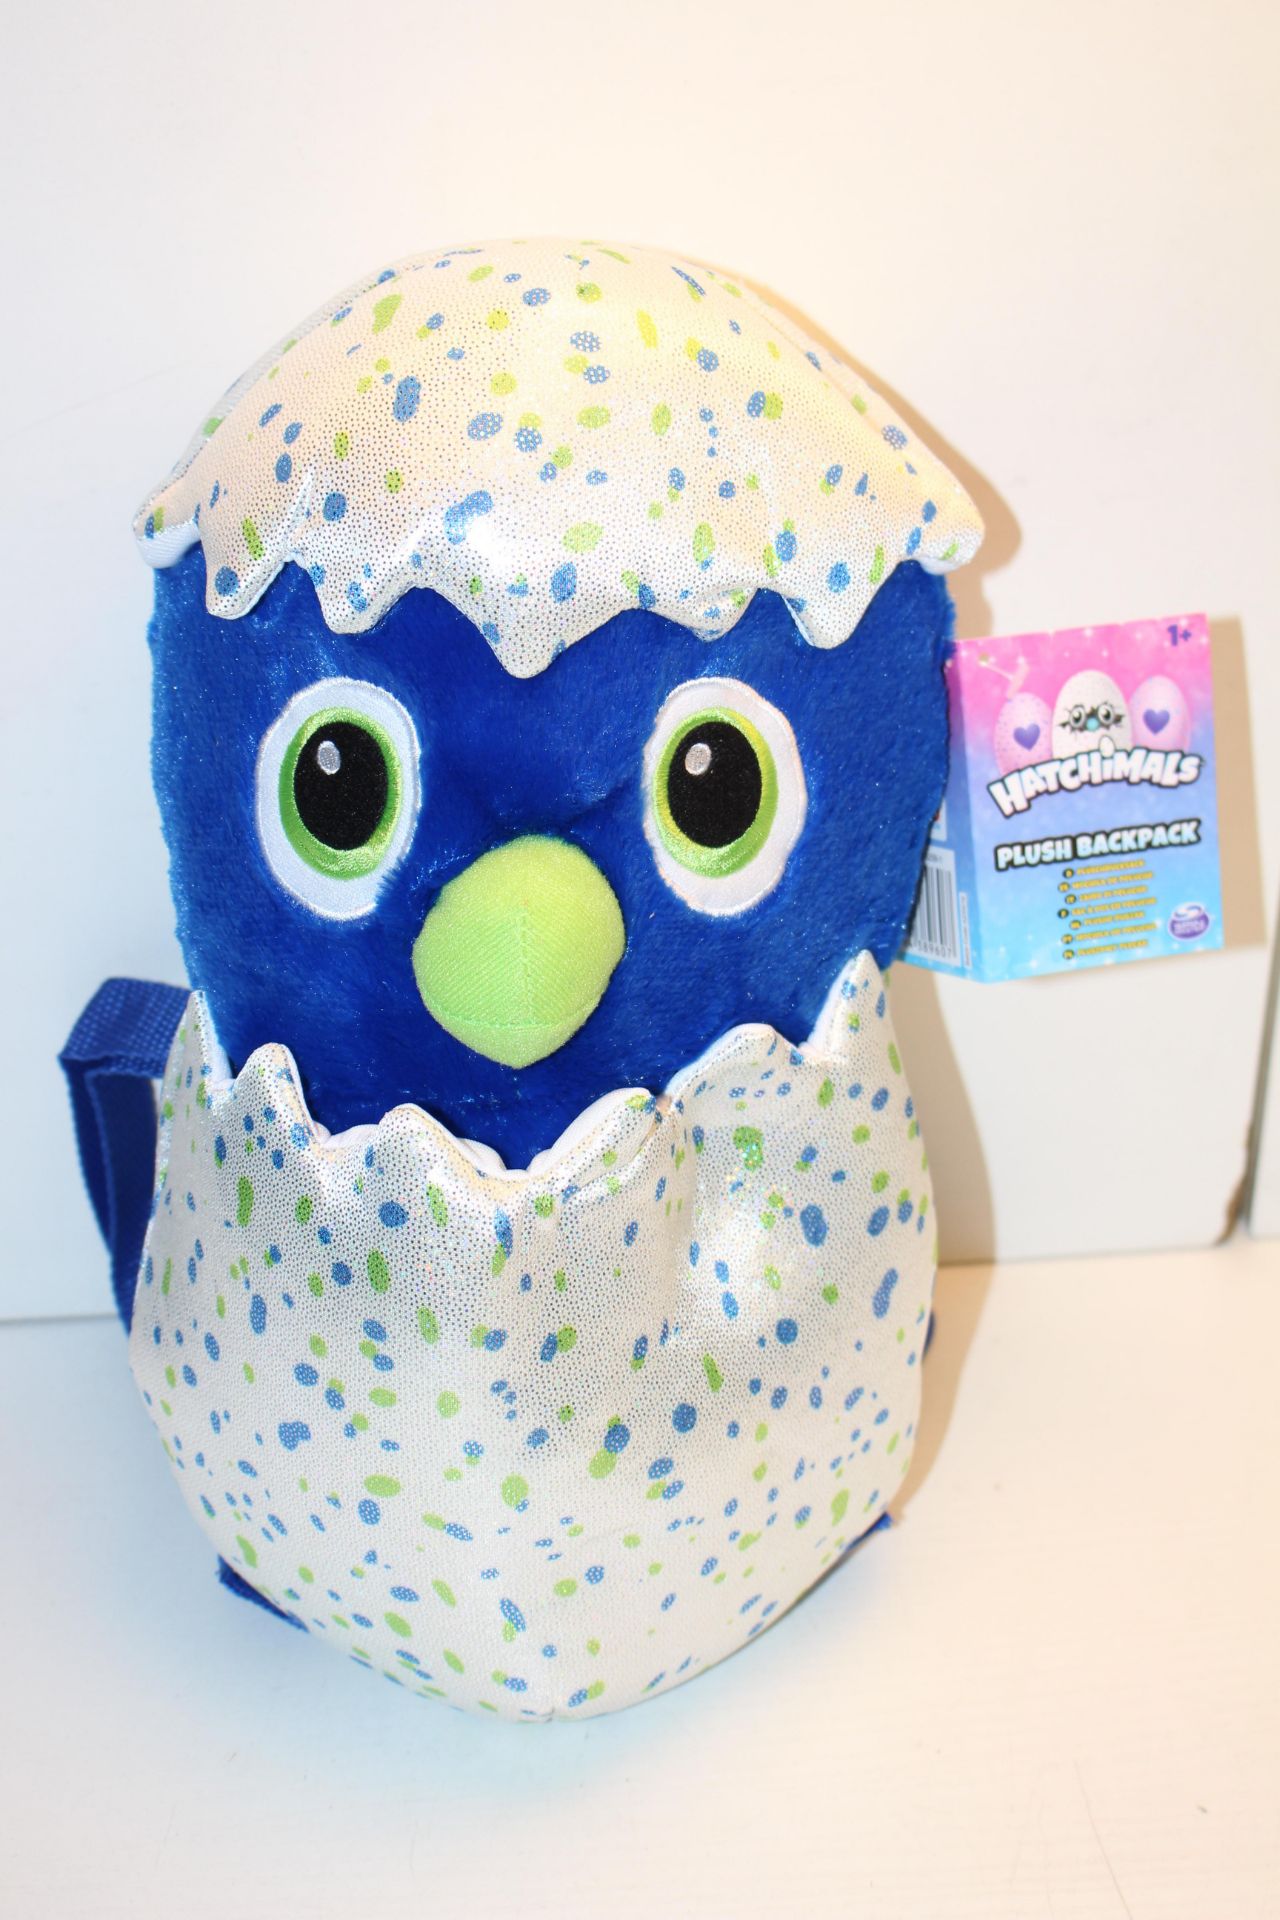 UNBOXED HATCHIMAL PLUSH BACKPACK - DRAGGLECondition ReportAppraisal Available on Request- All